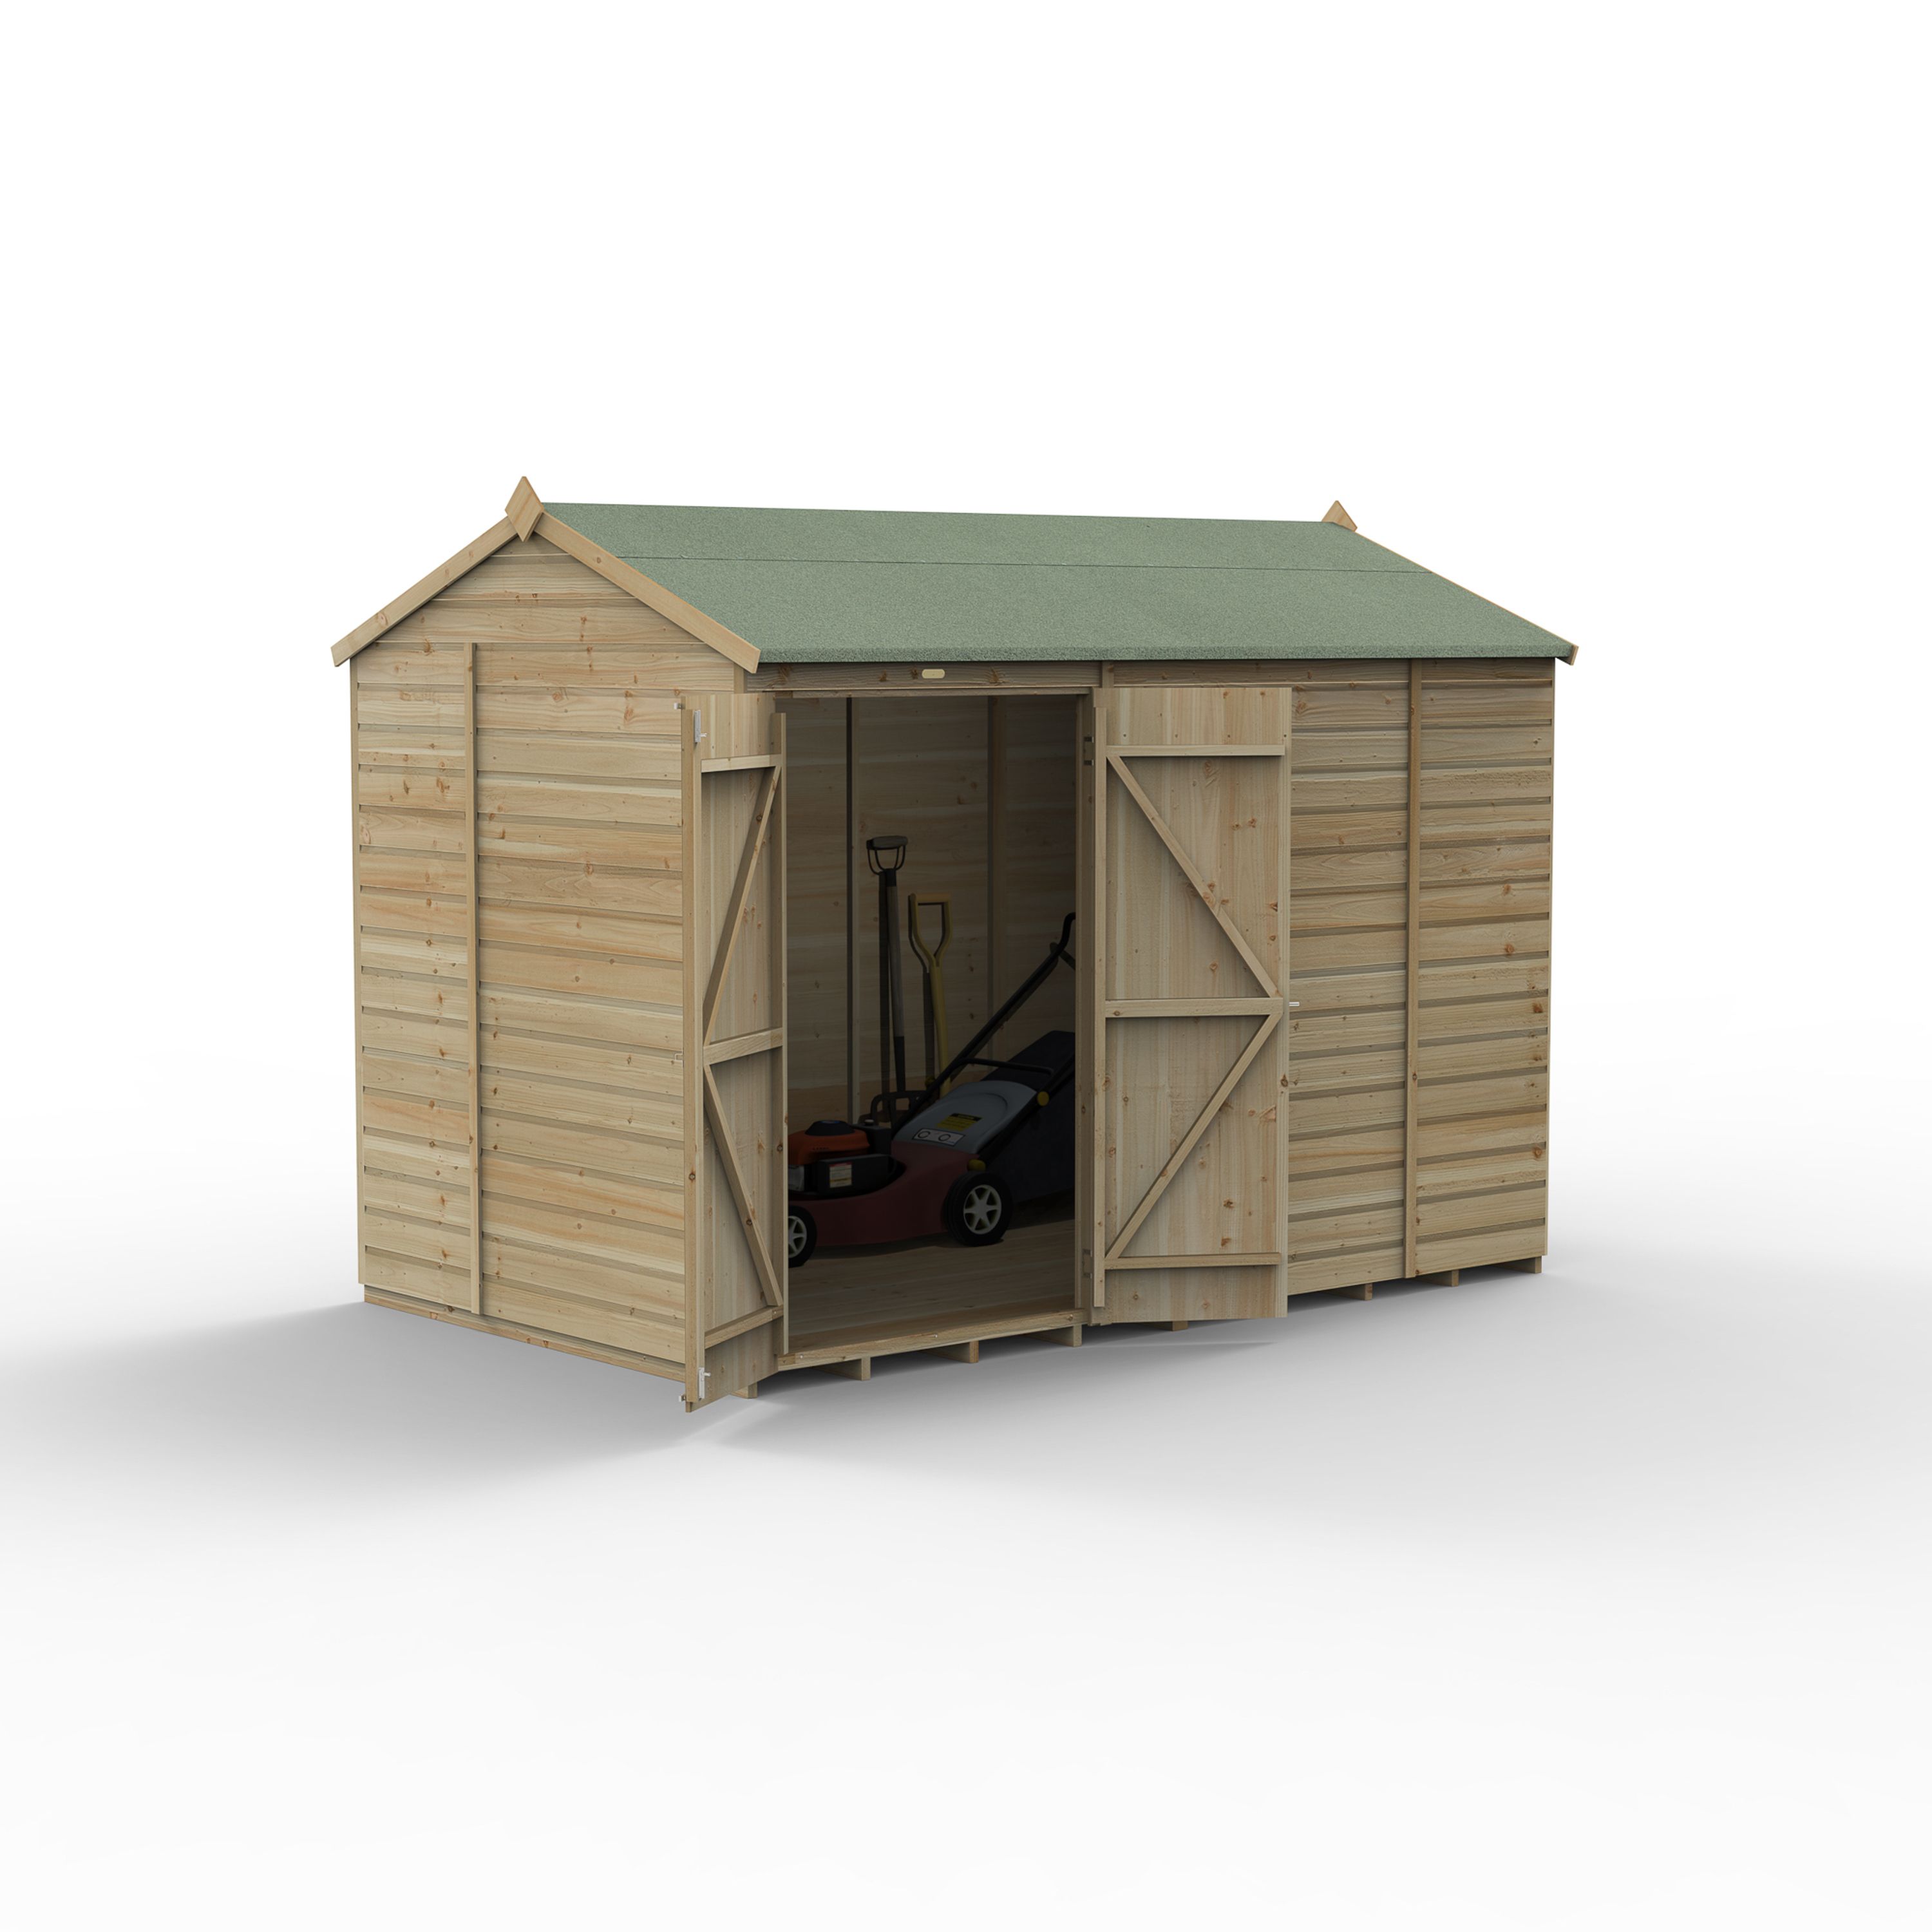 Forest Garden Beckwood 10x6 ft Reverse apex Natural timber Wooden 2 door Shed with floor (Base included) - Assembly not required